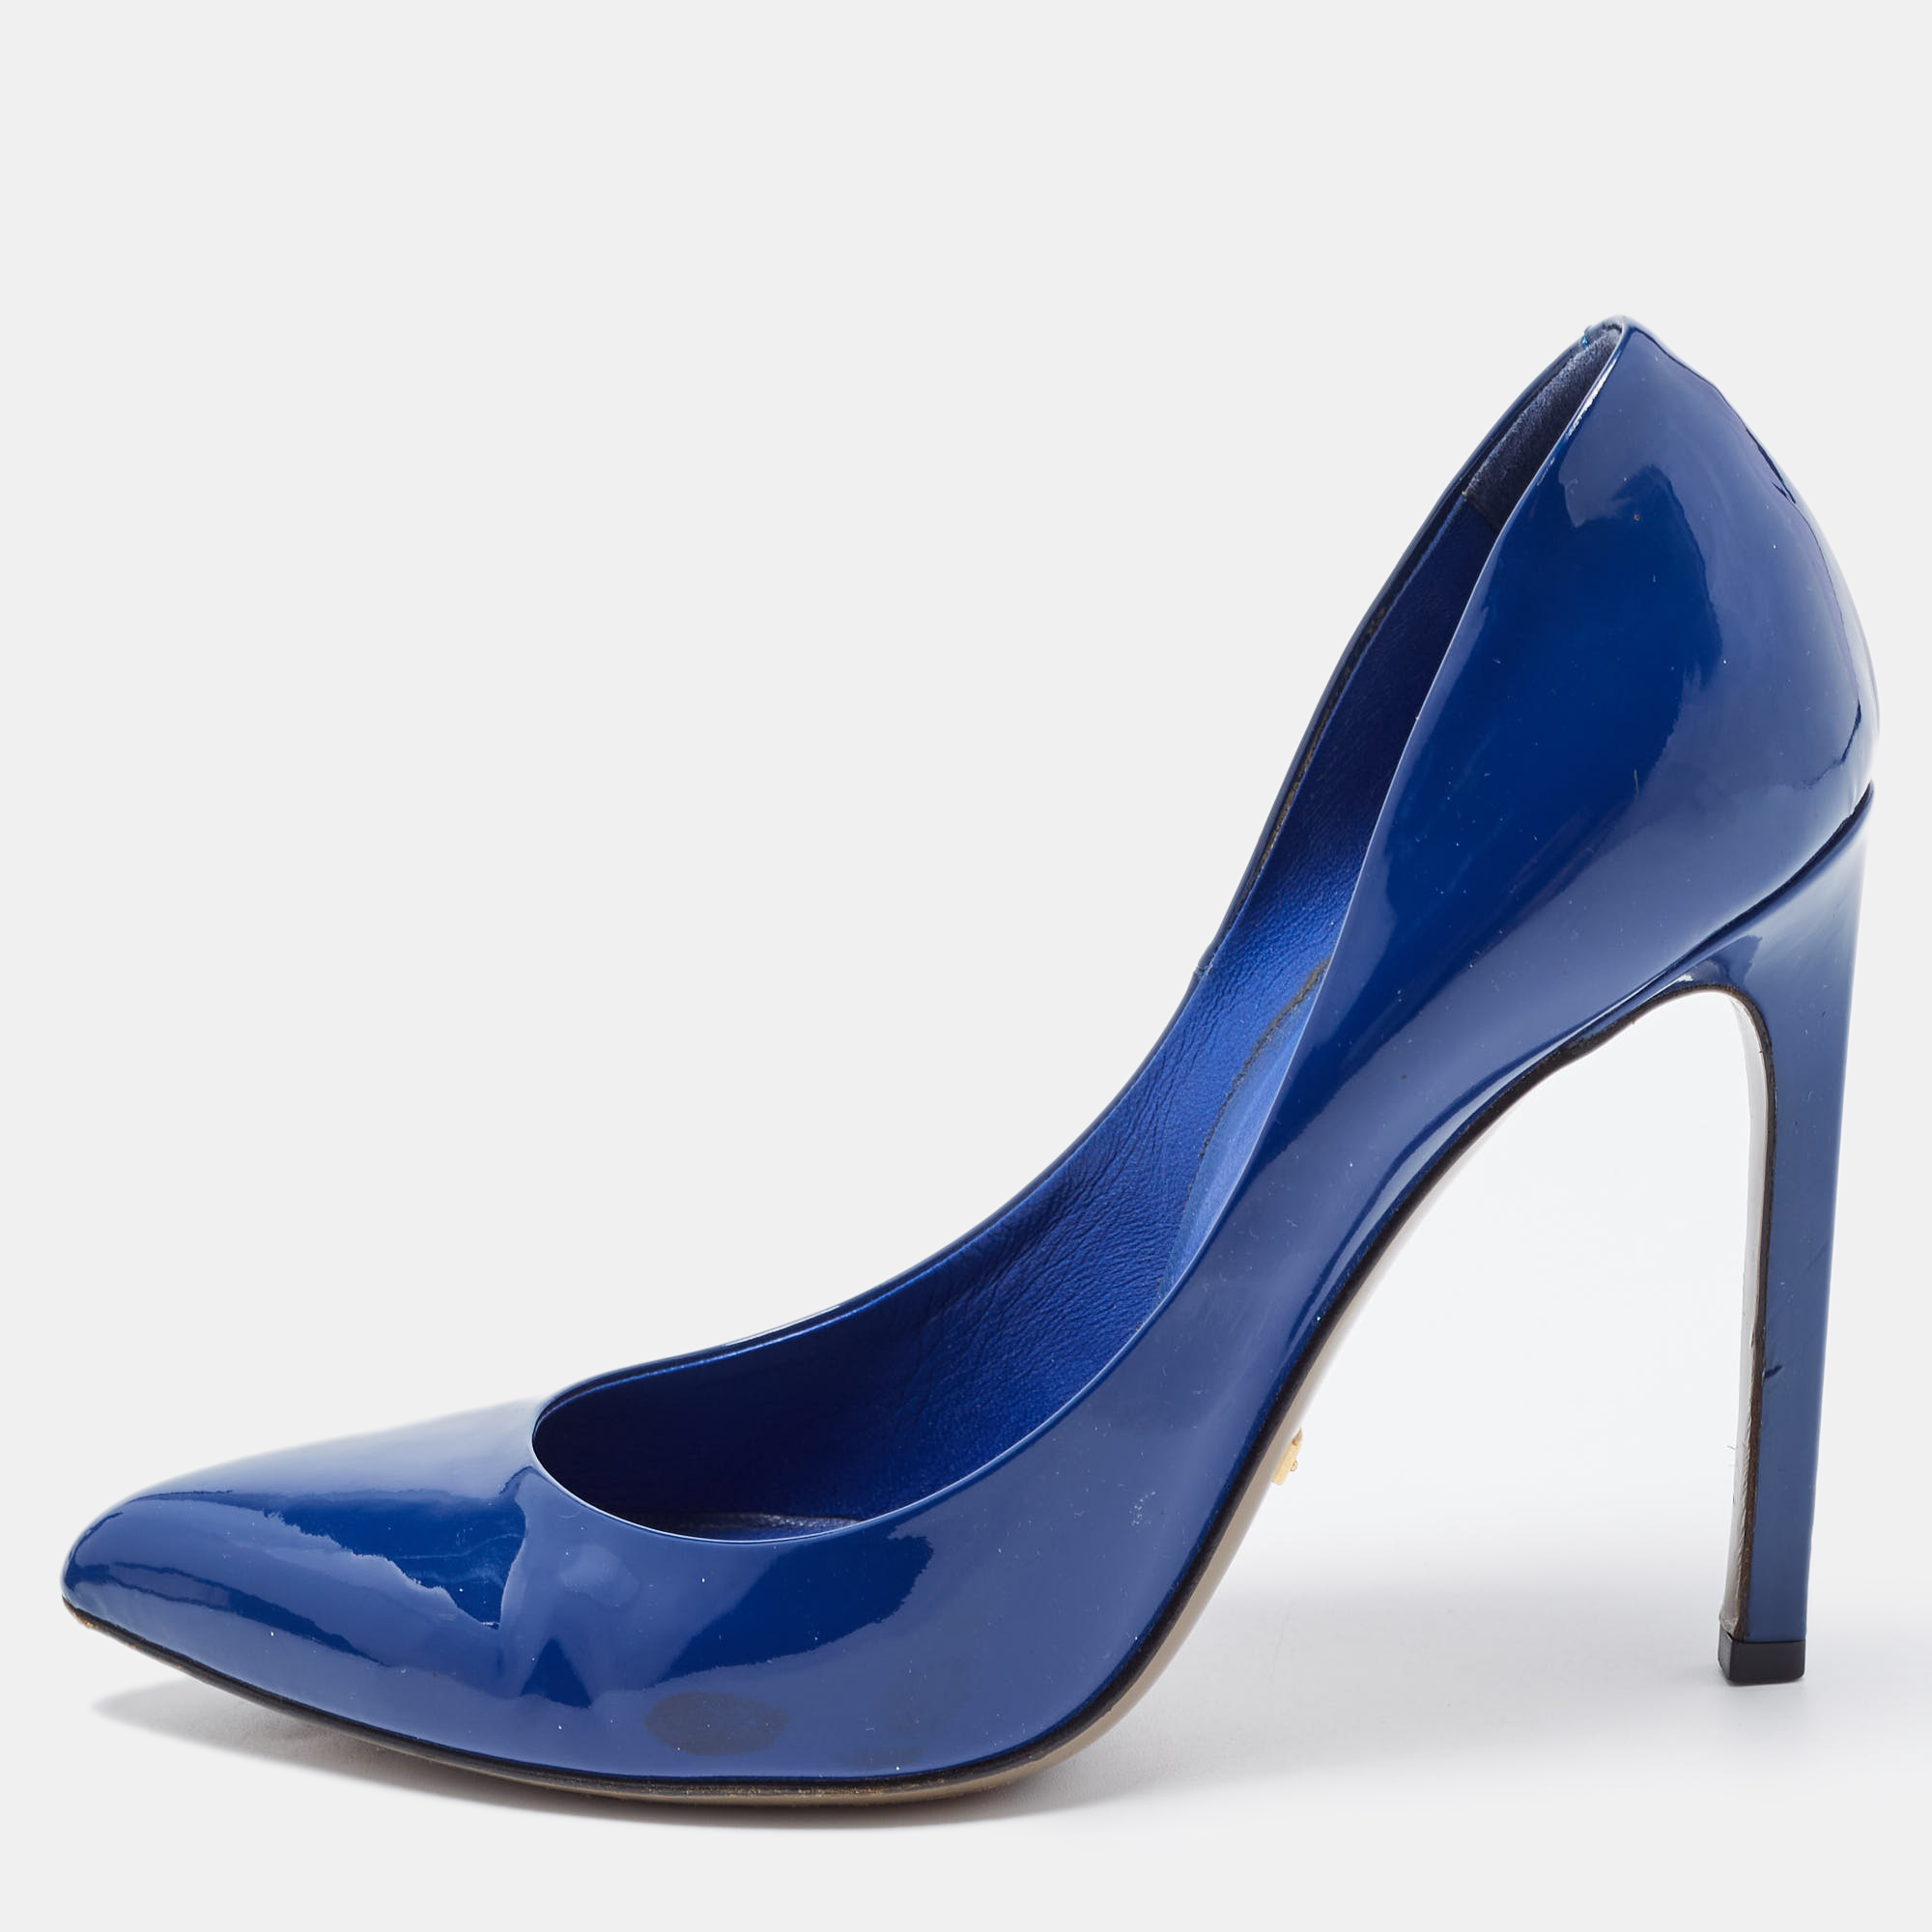 Pre-owned Gucci Royal Blue Patent Leather Pointed Toe Pumps Size 37.5